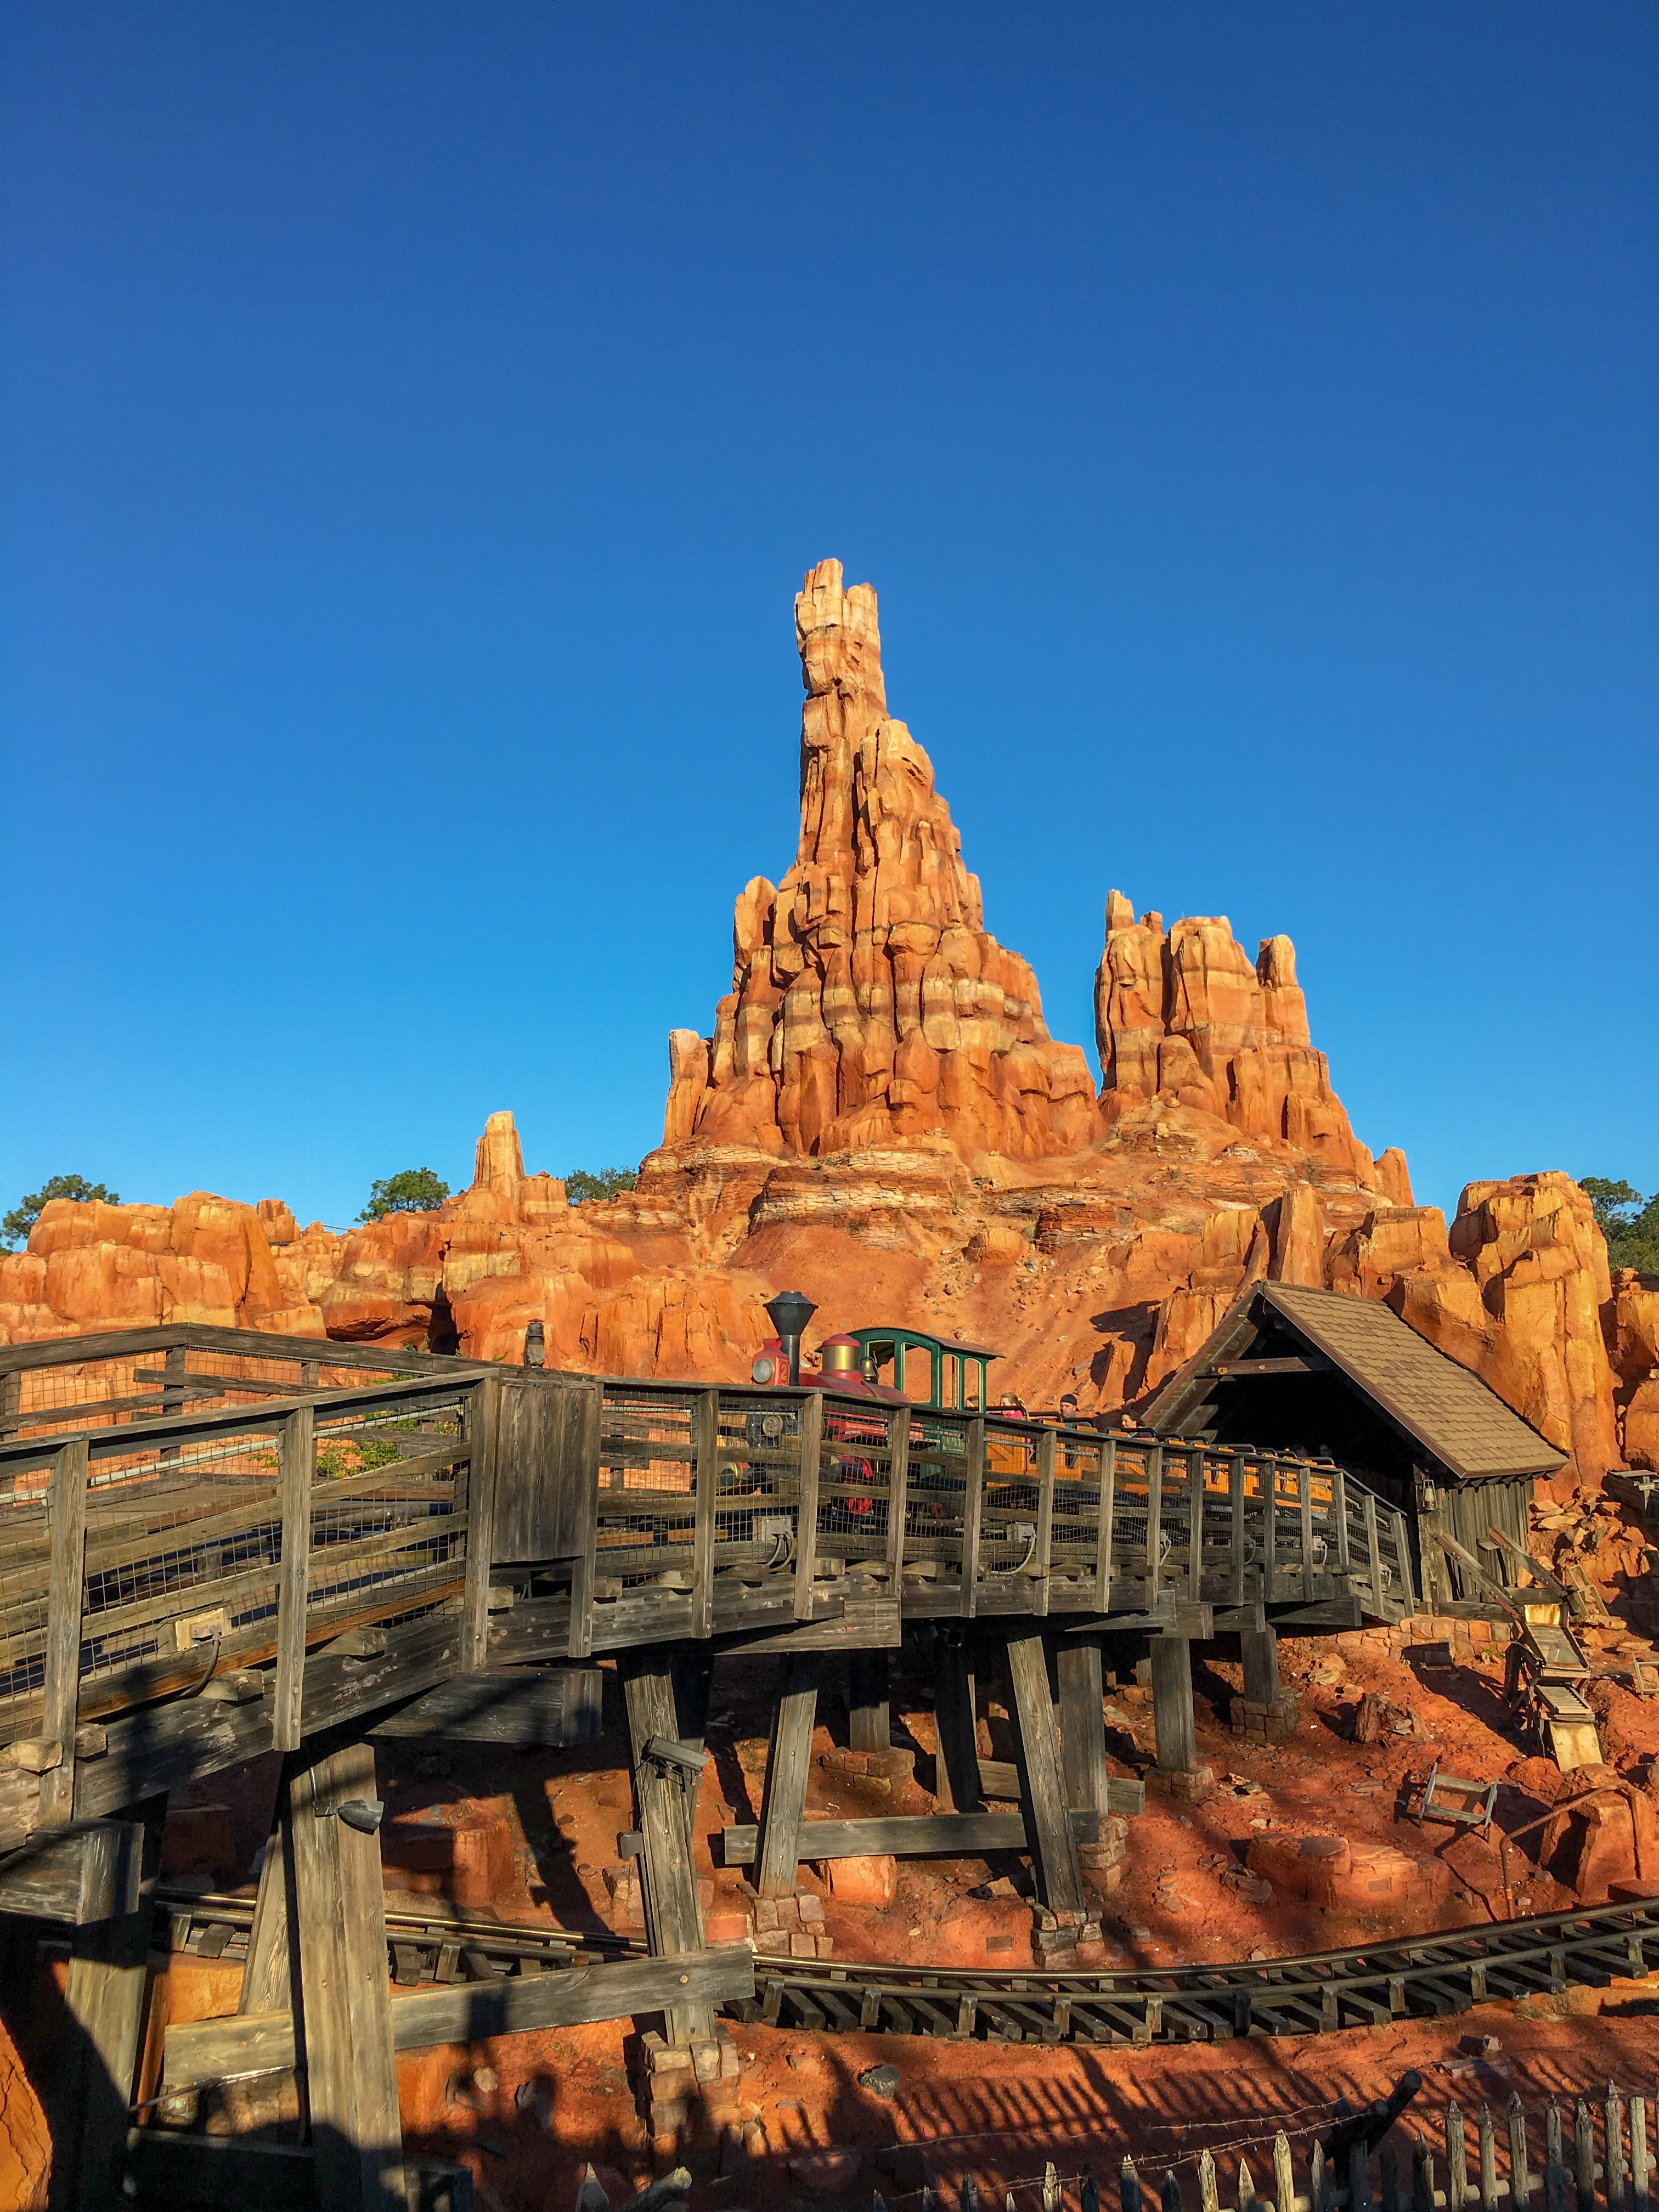 Thunder mountain with train in front